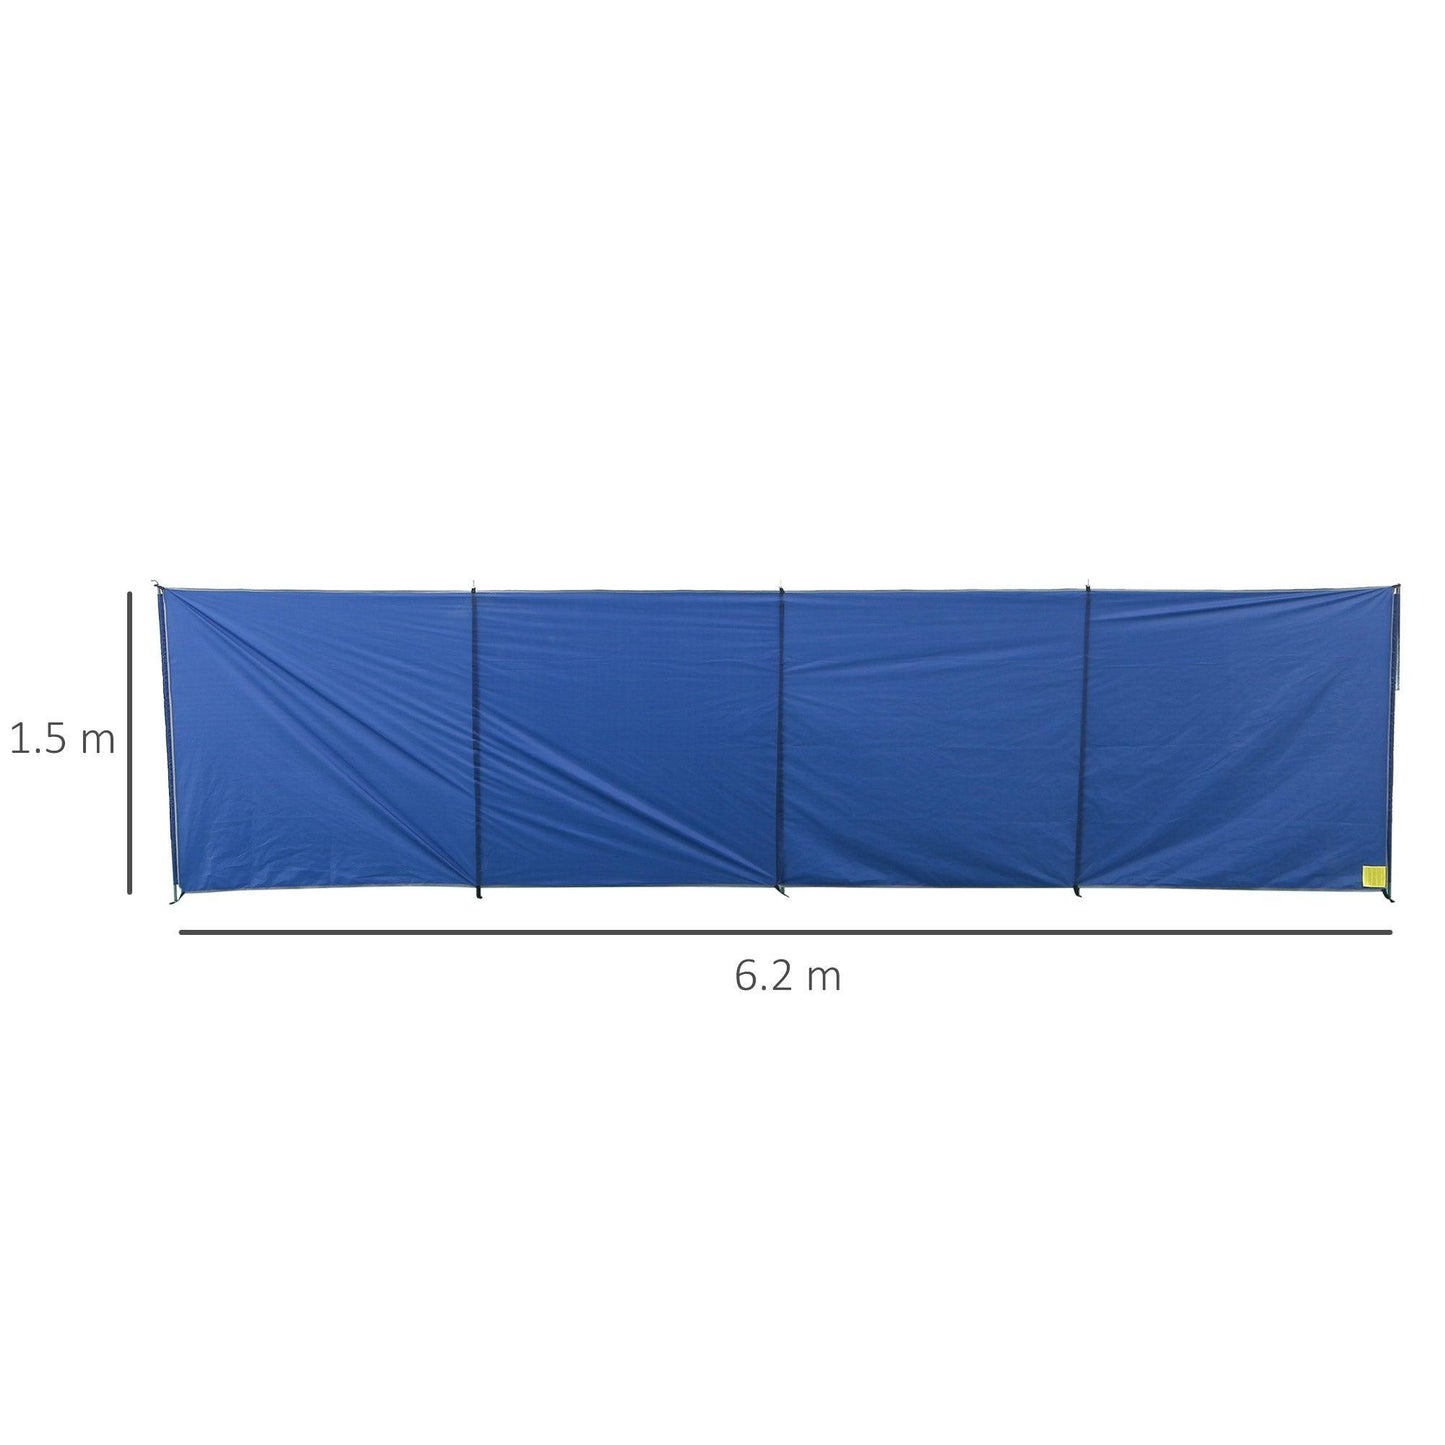 Outsunny Portable Windbreak for Camping, Beach or Outdoors - ALL4U RETAILER LTD